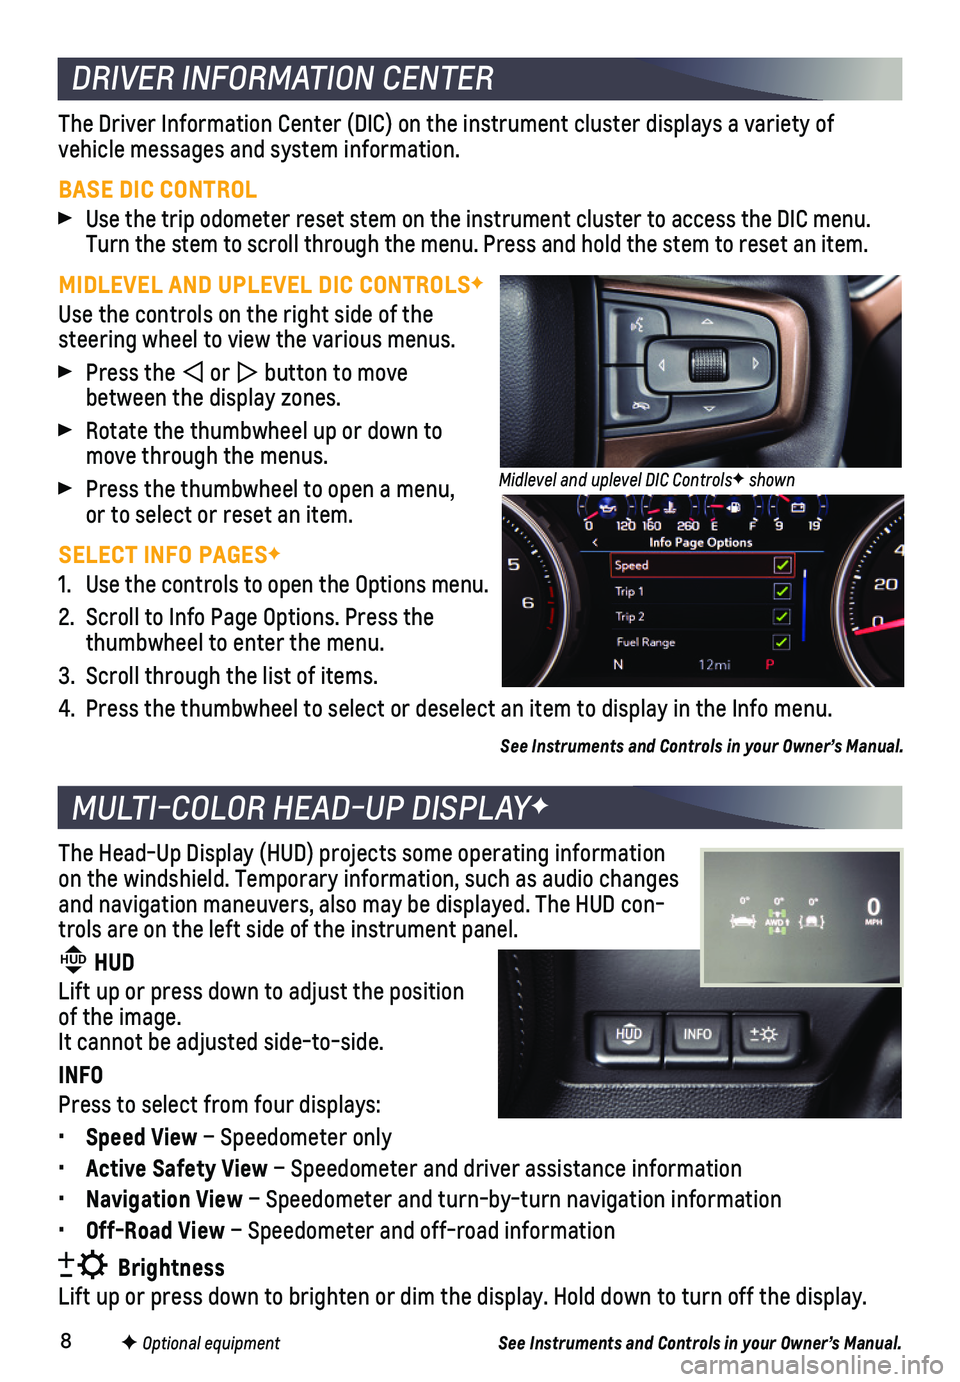 CHEVROLET SILVERADO 2019  Get To Know Guide 8F Optional equipment
DRIVER INFORMATION CENTER
MULTI-COLOR HEAD-UP DISPLAYF
The Driver Information Center (DIC) on the instrument cluster displays\
 a variety of  
vehicle messages and system informa